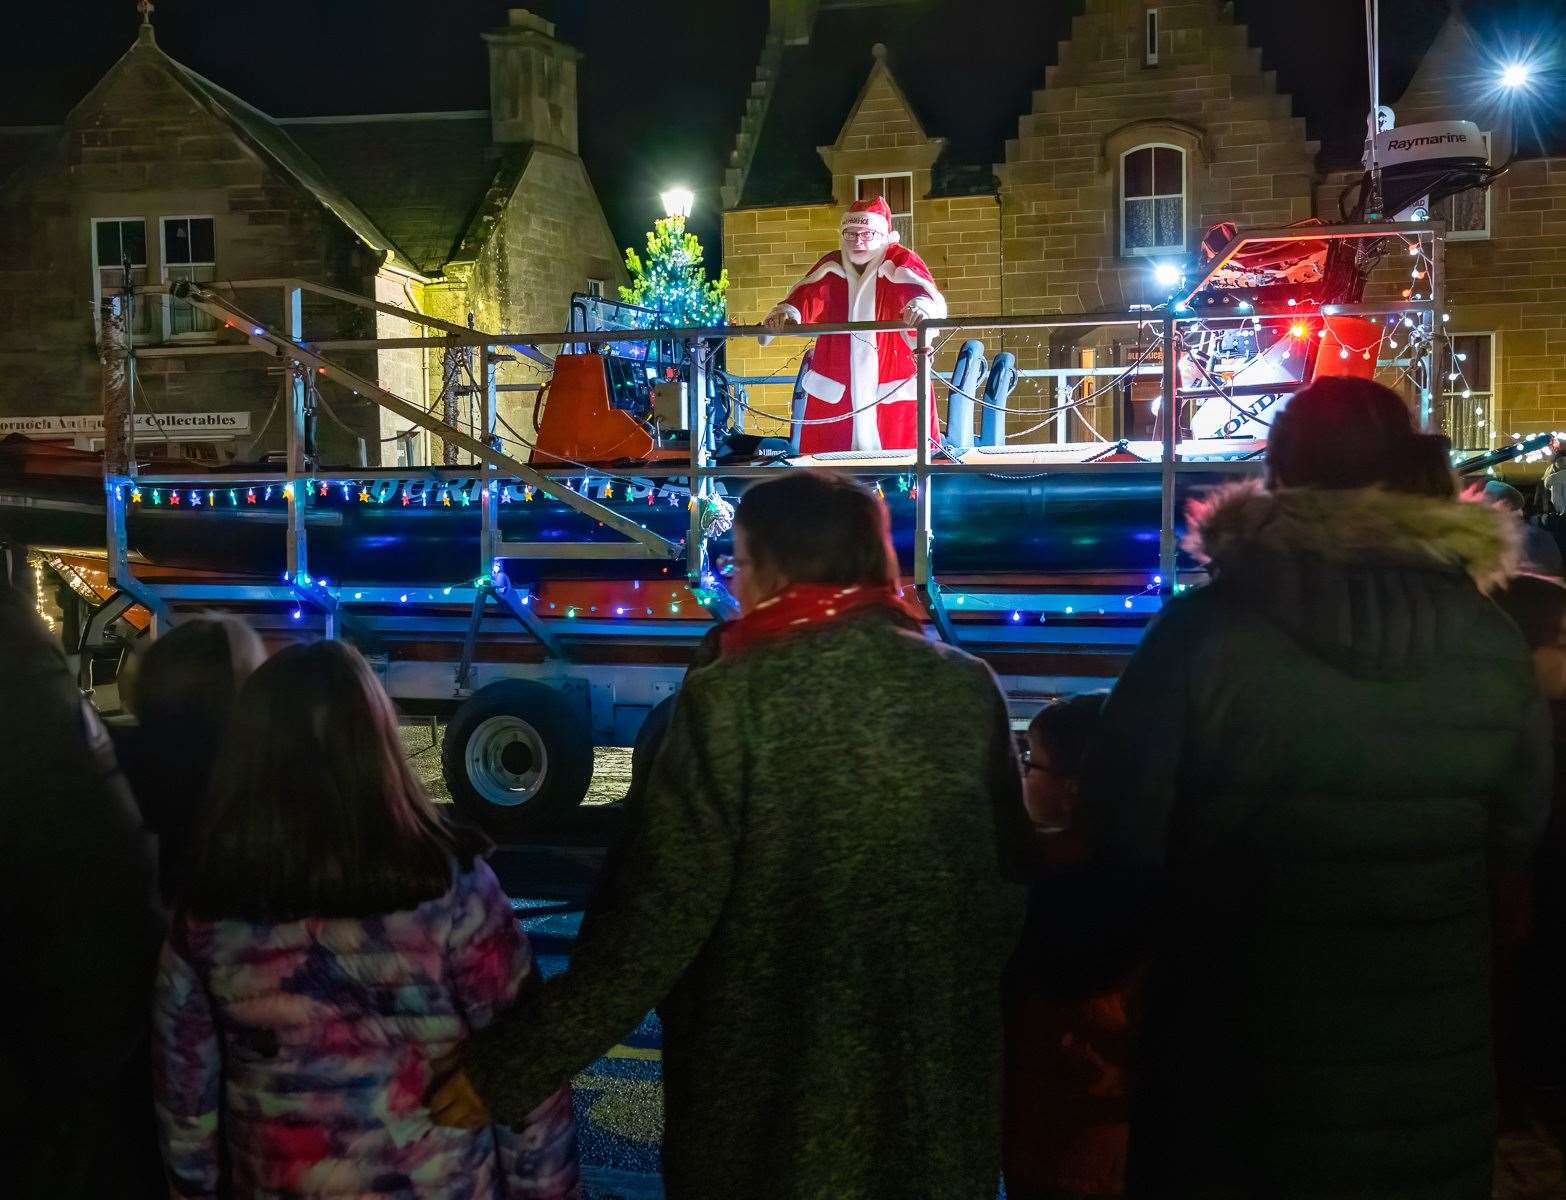 Members of ESRA gave their new lifeboat a Christmas makeover for the festive event. Picture: Andy Kirby